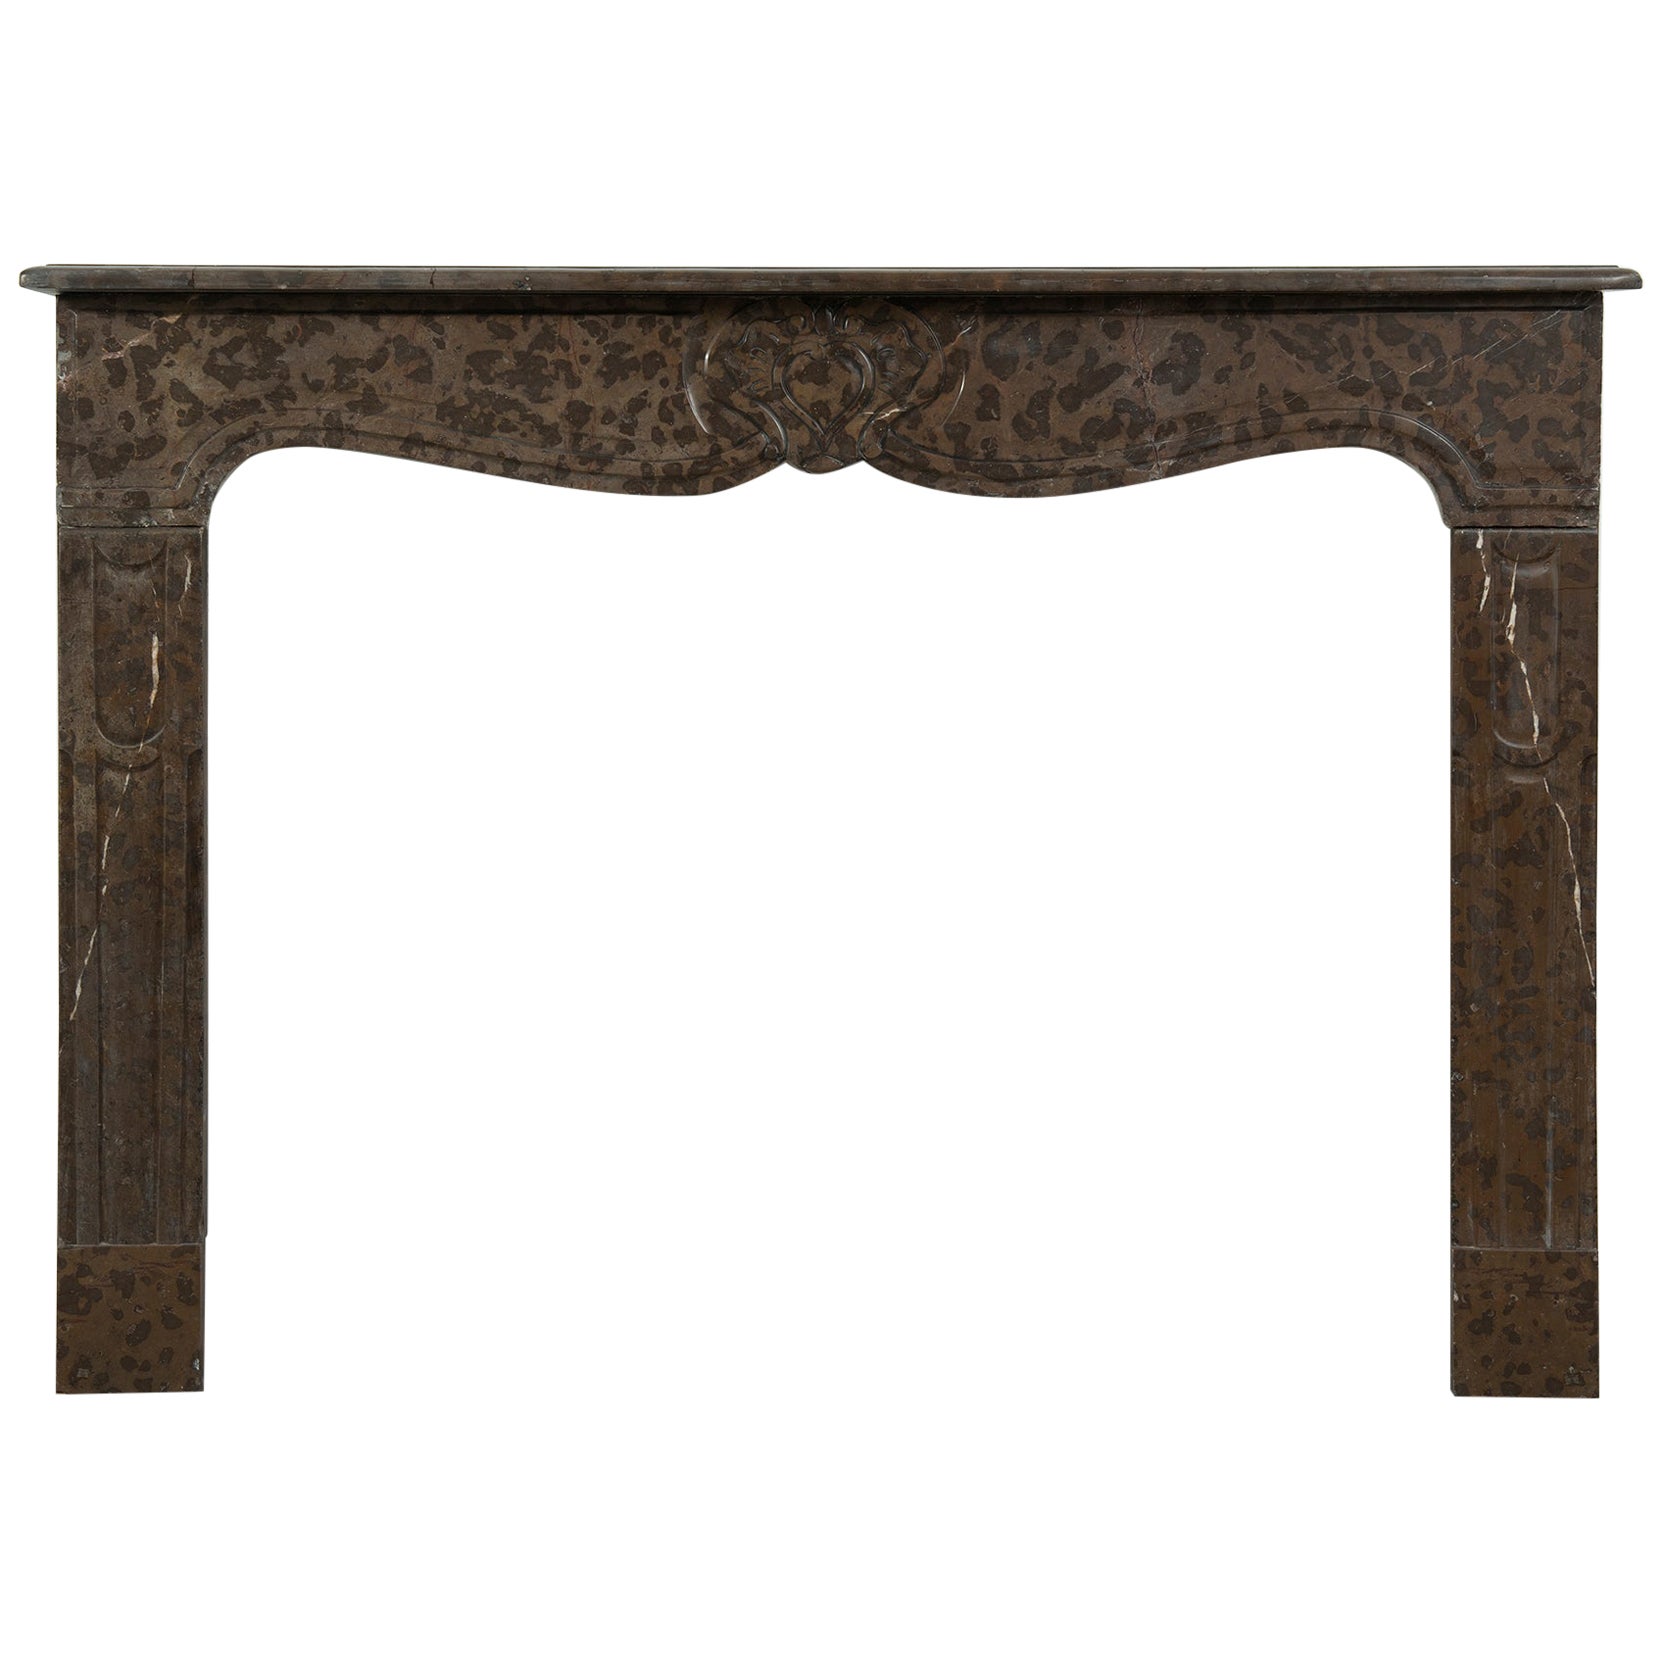 Antique Louis XV Fireplace For Sale